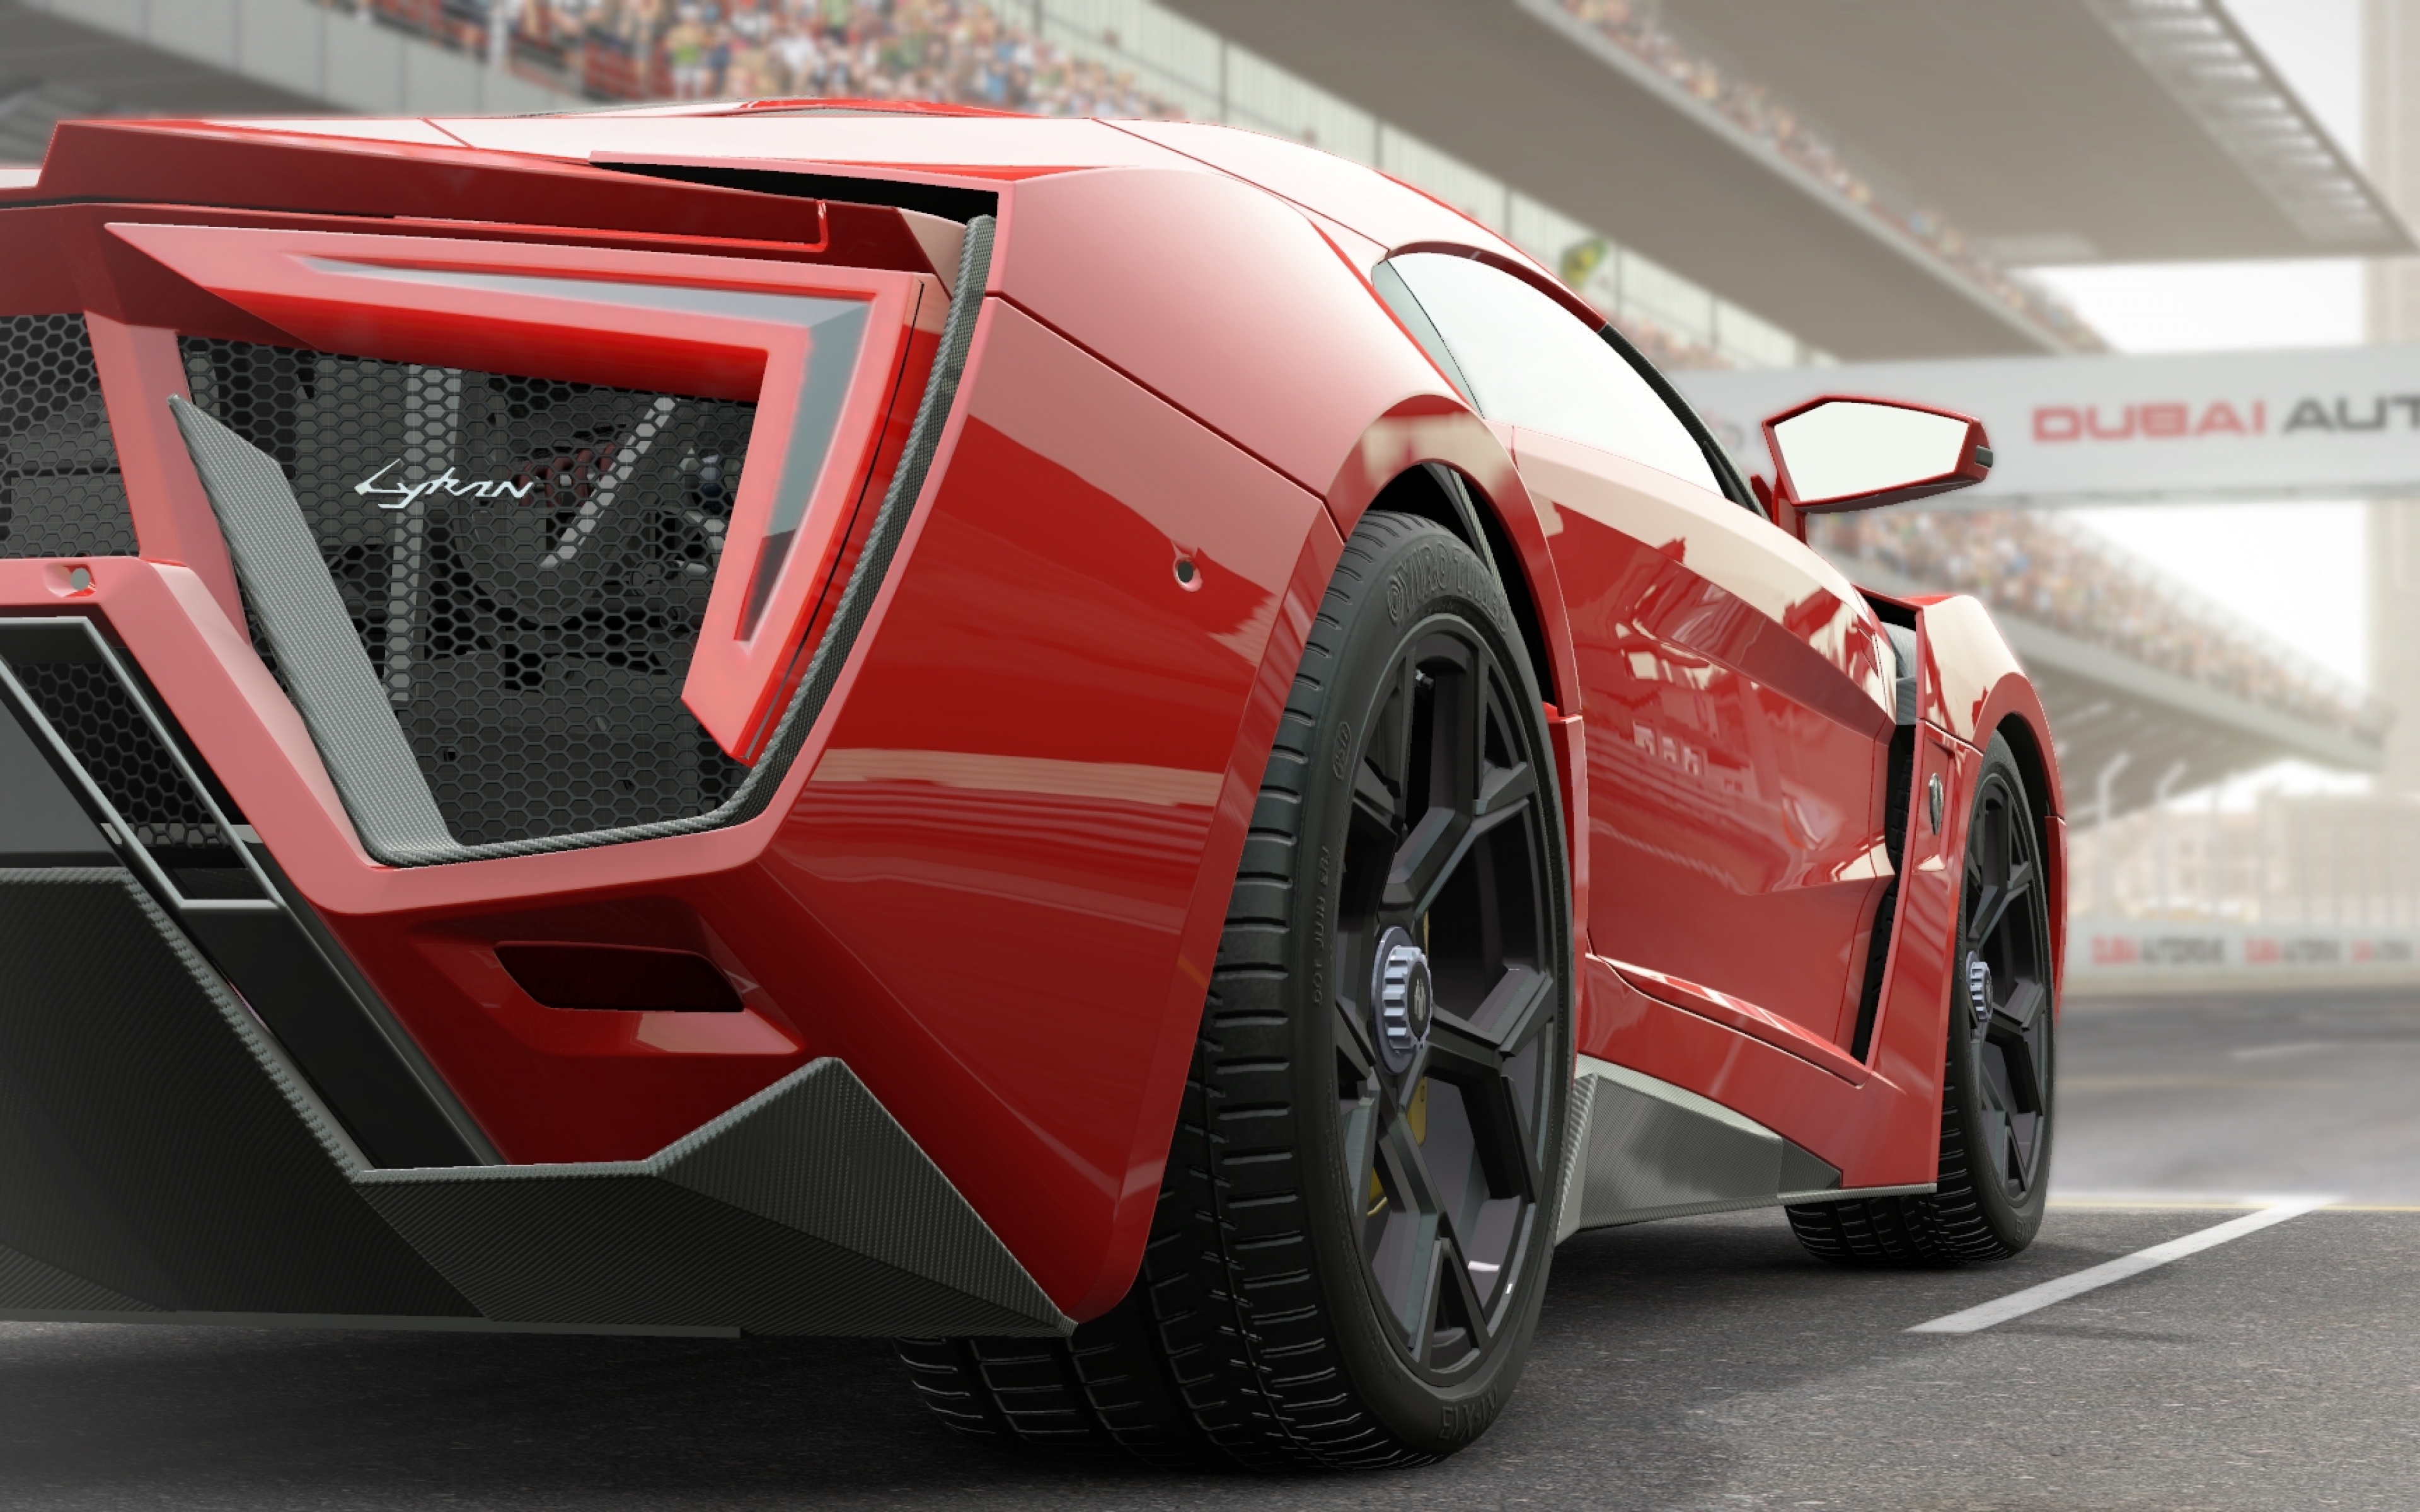 Hd Background Project Cars Lykan Hypersport Red Supercar - Lykan Hypersport Wallpaper 1080p - HD Wallpaper 